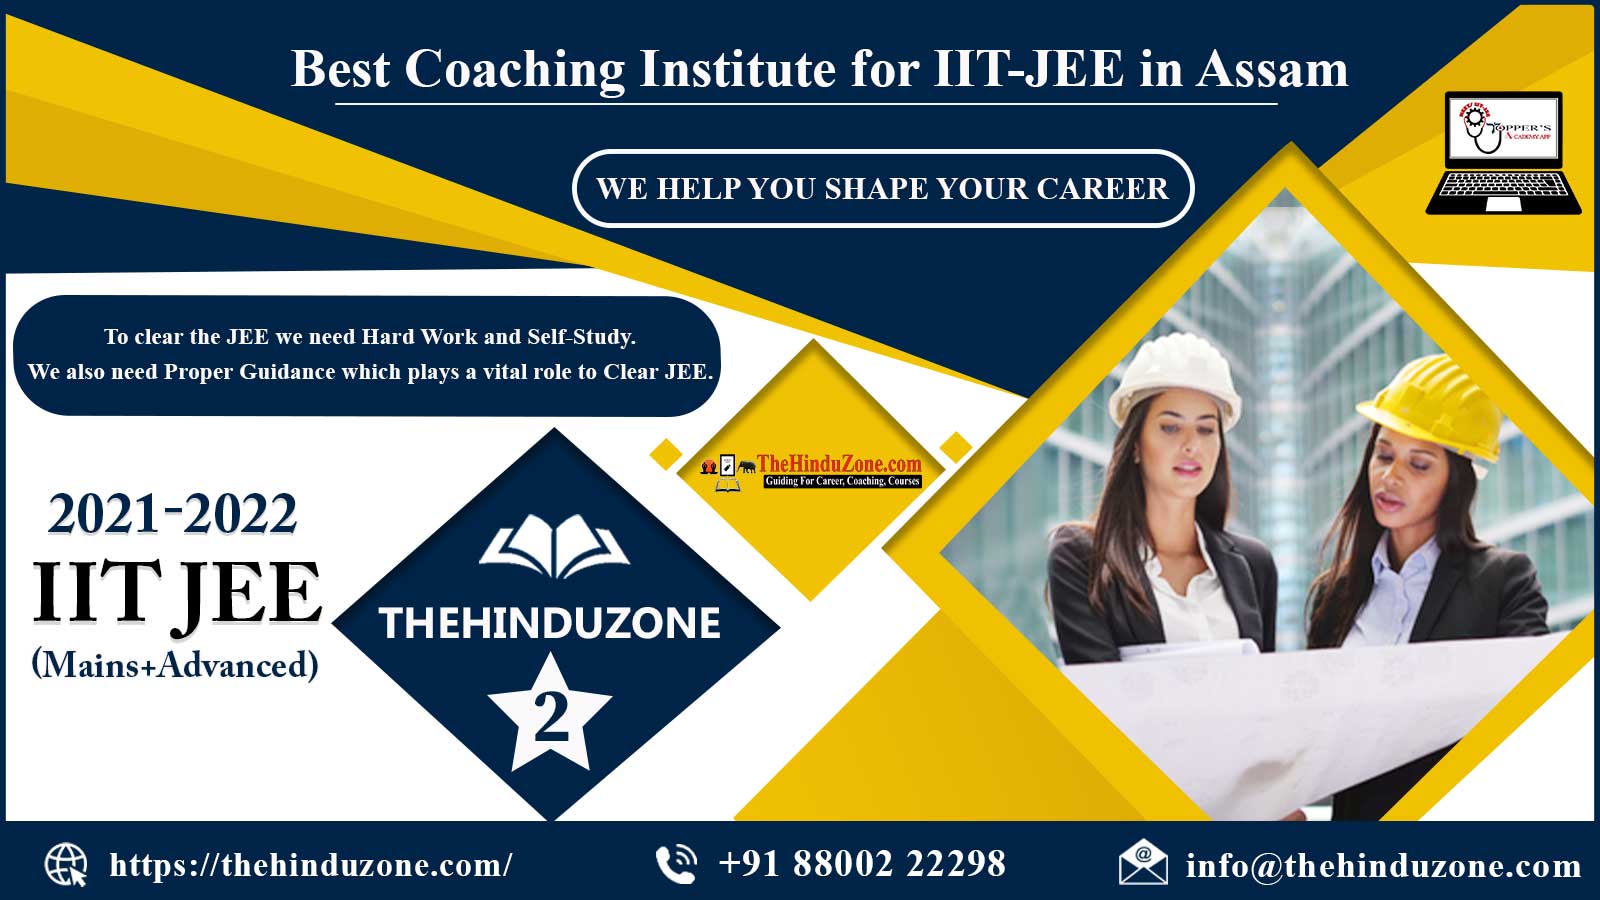 The Hinduzone IIT JEE Coaching in Assam